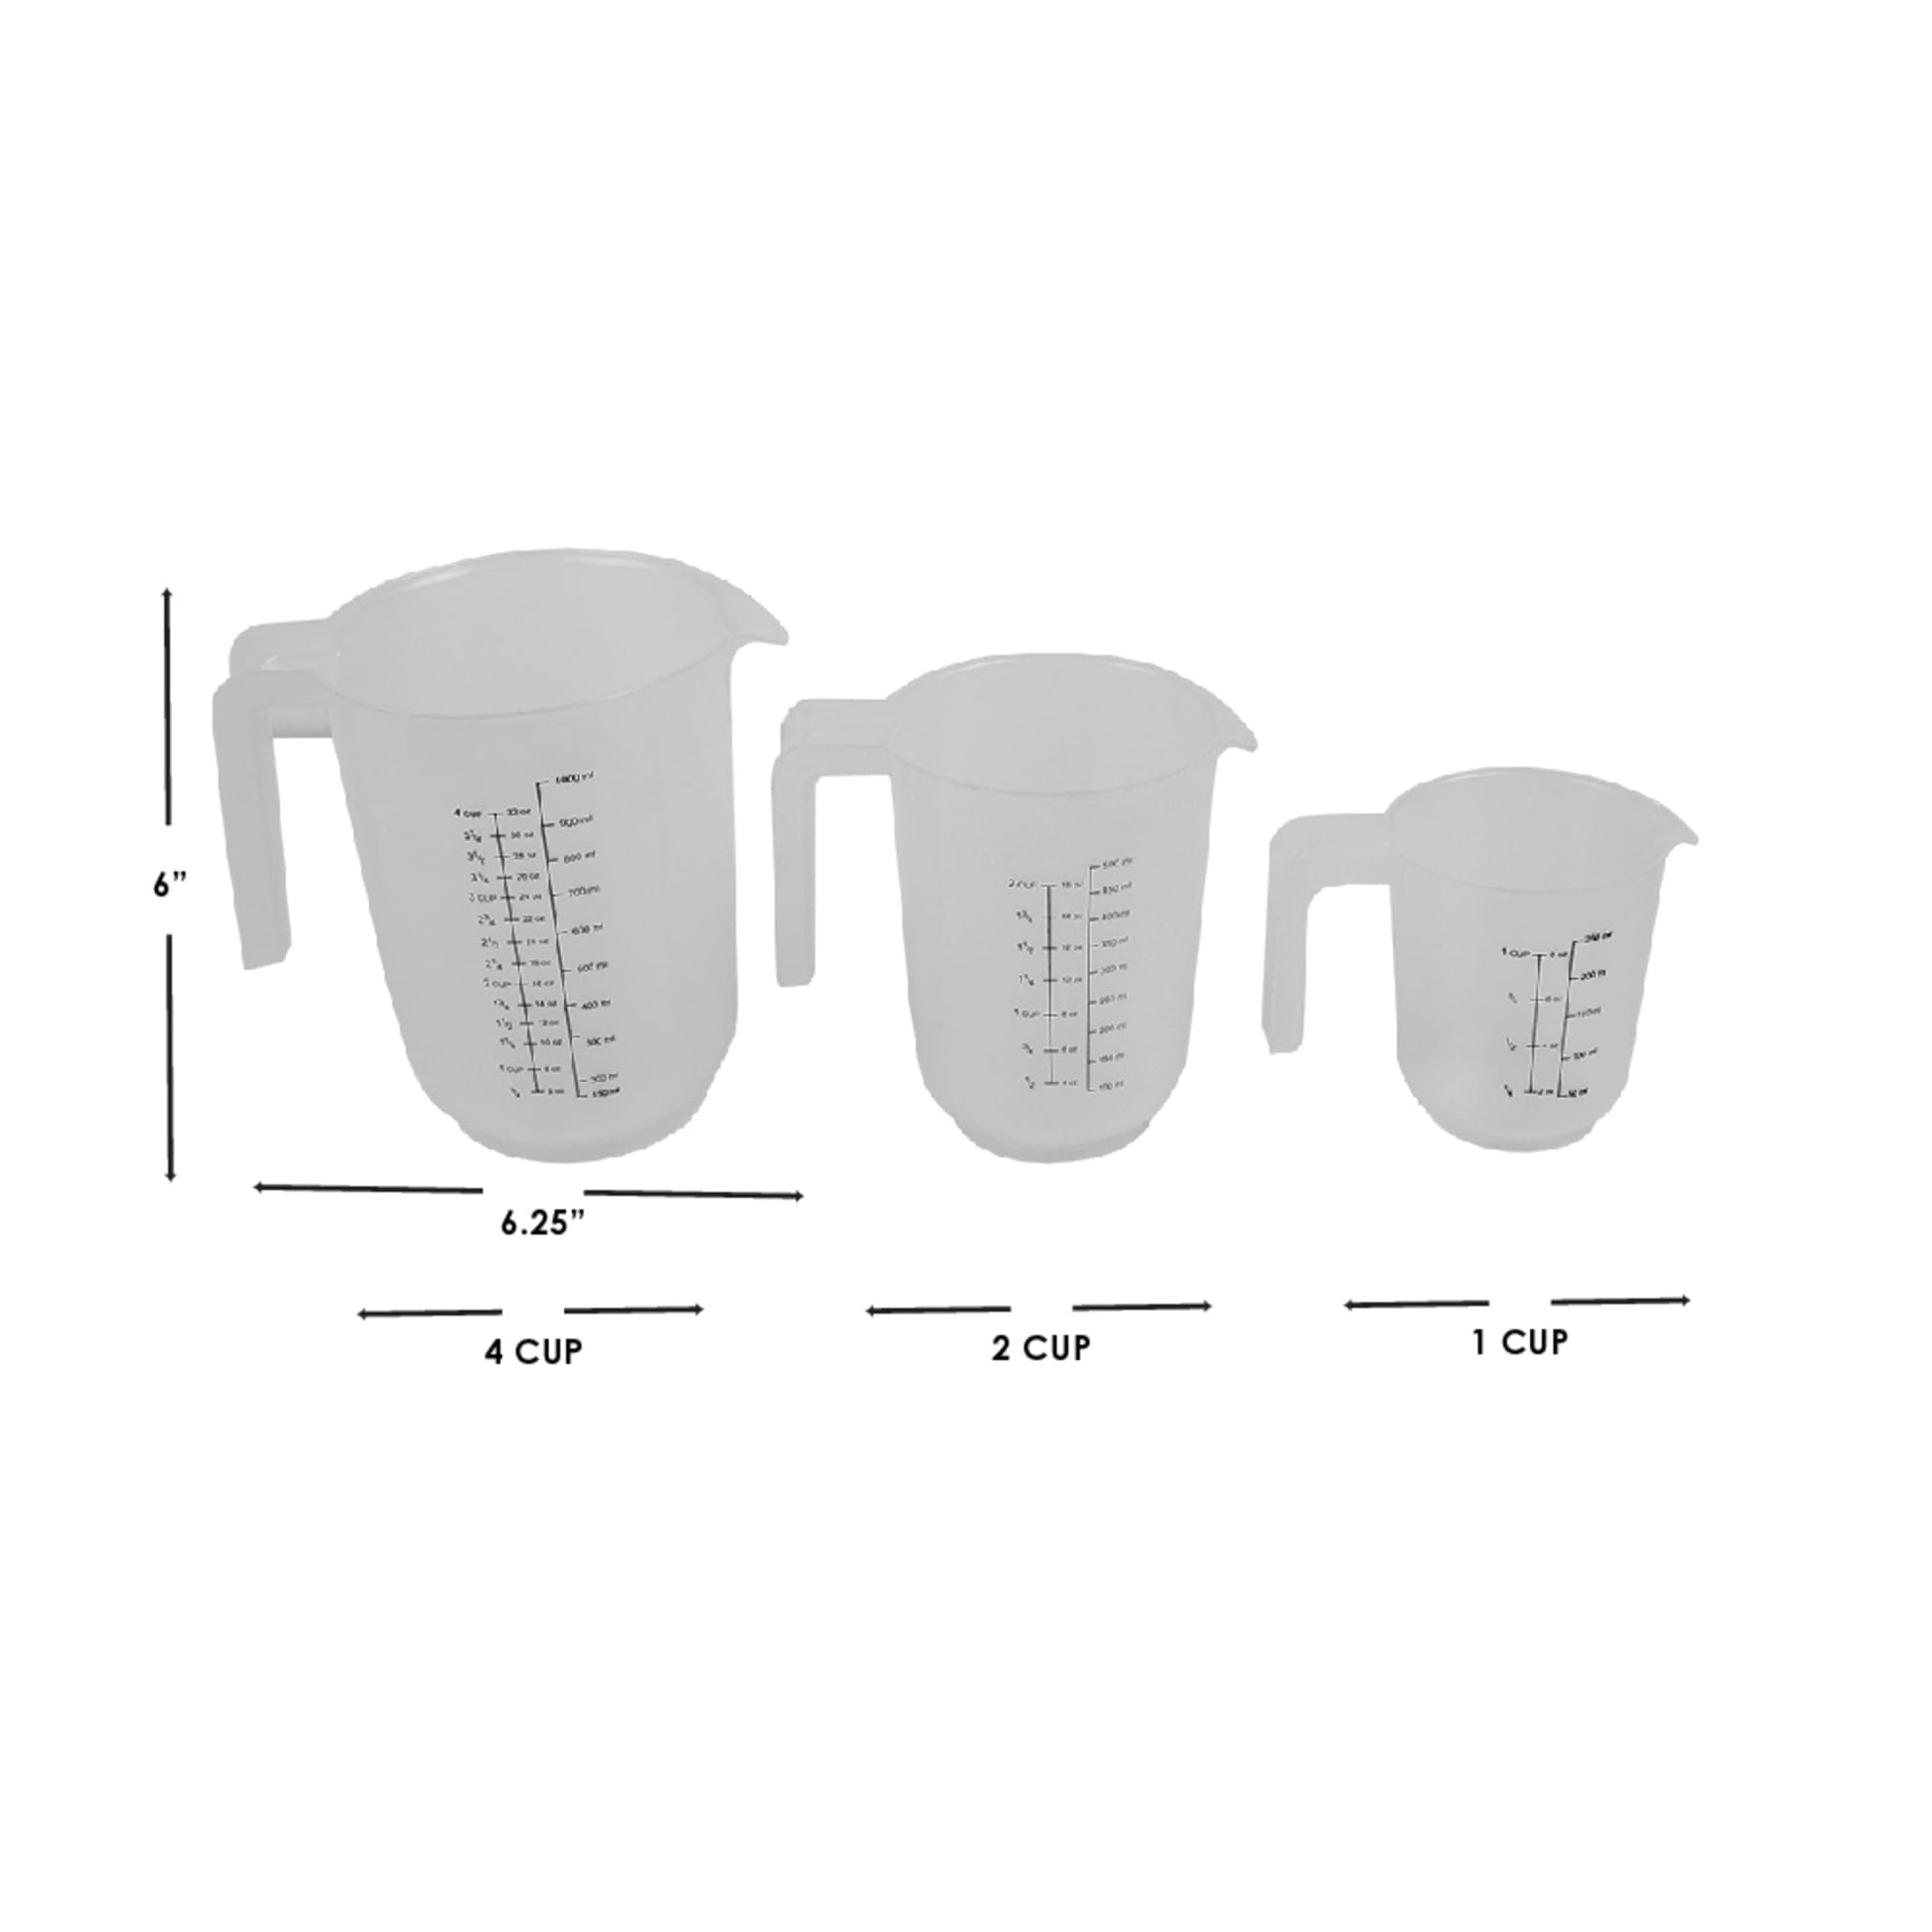 Press Measuring Cups Set, Clear